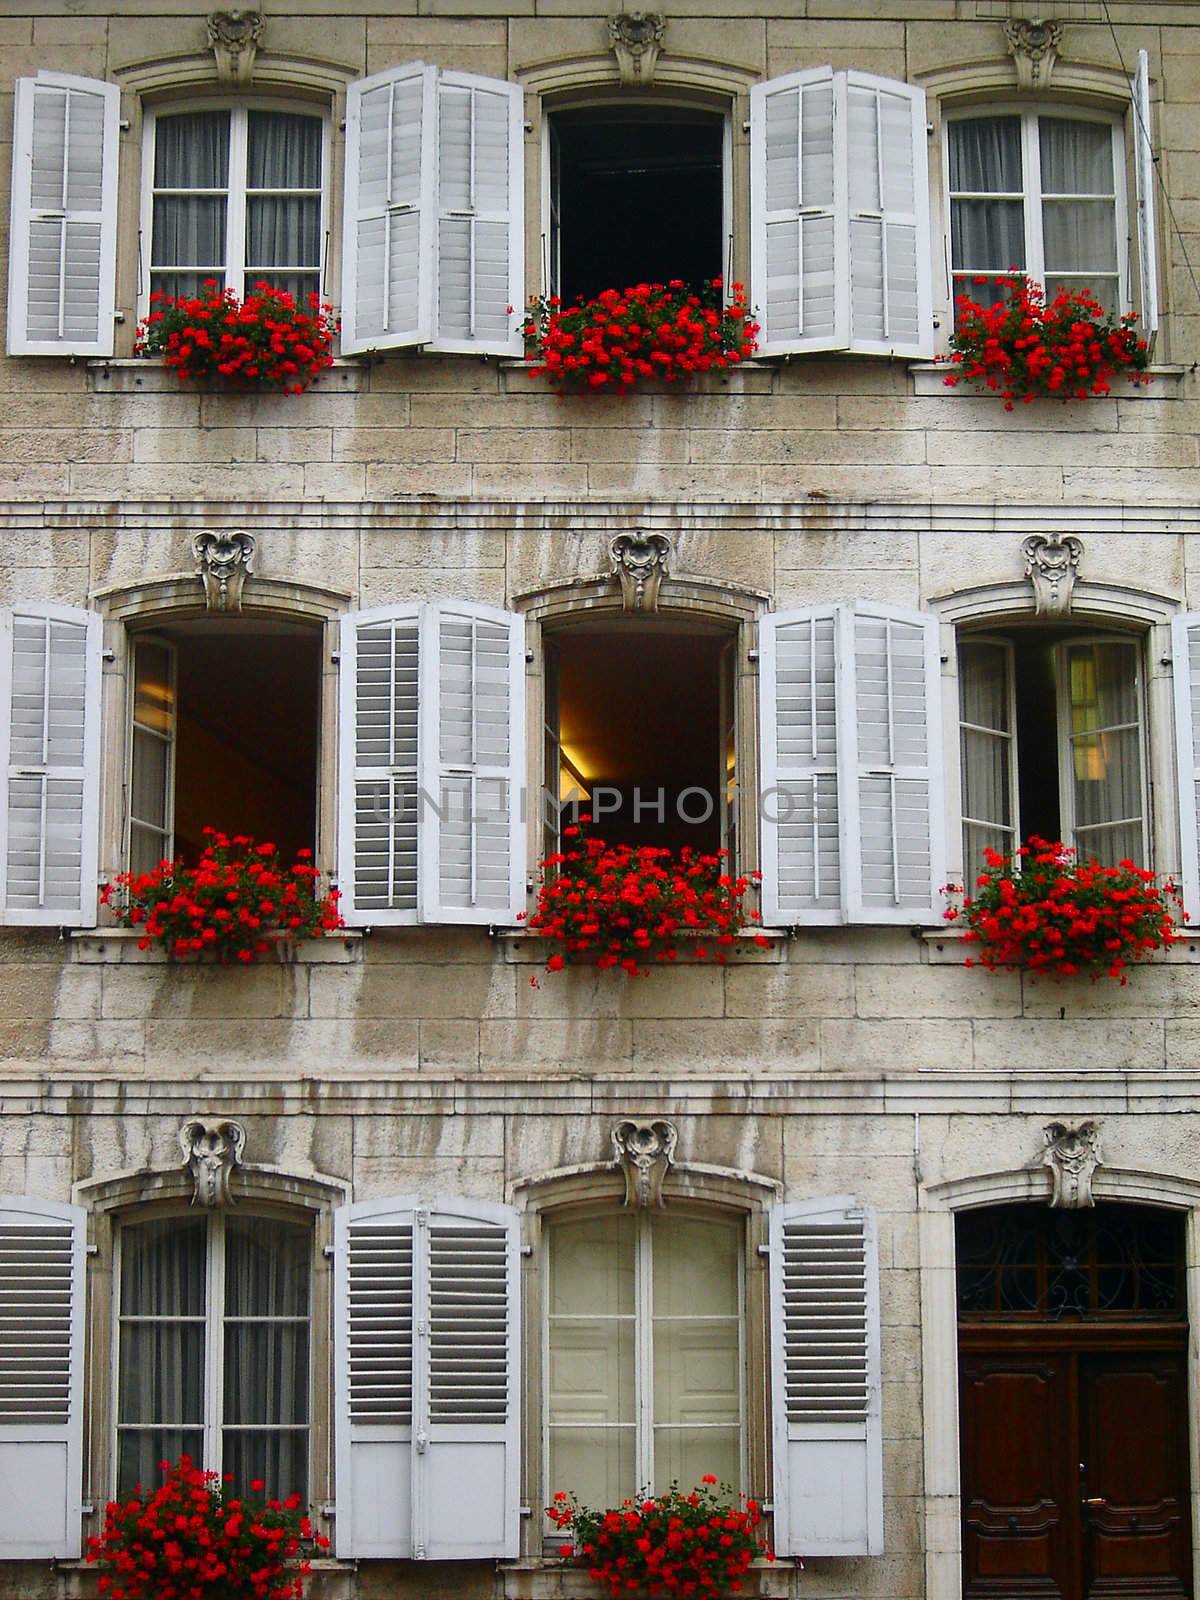 typical swiss fa�ade with flower pots in windows